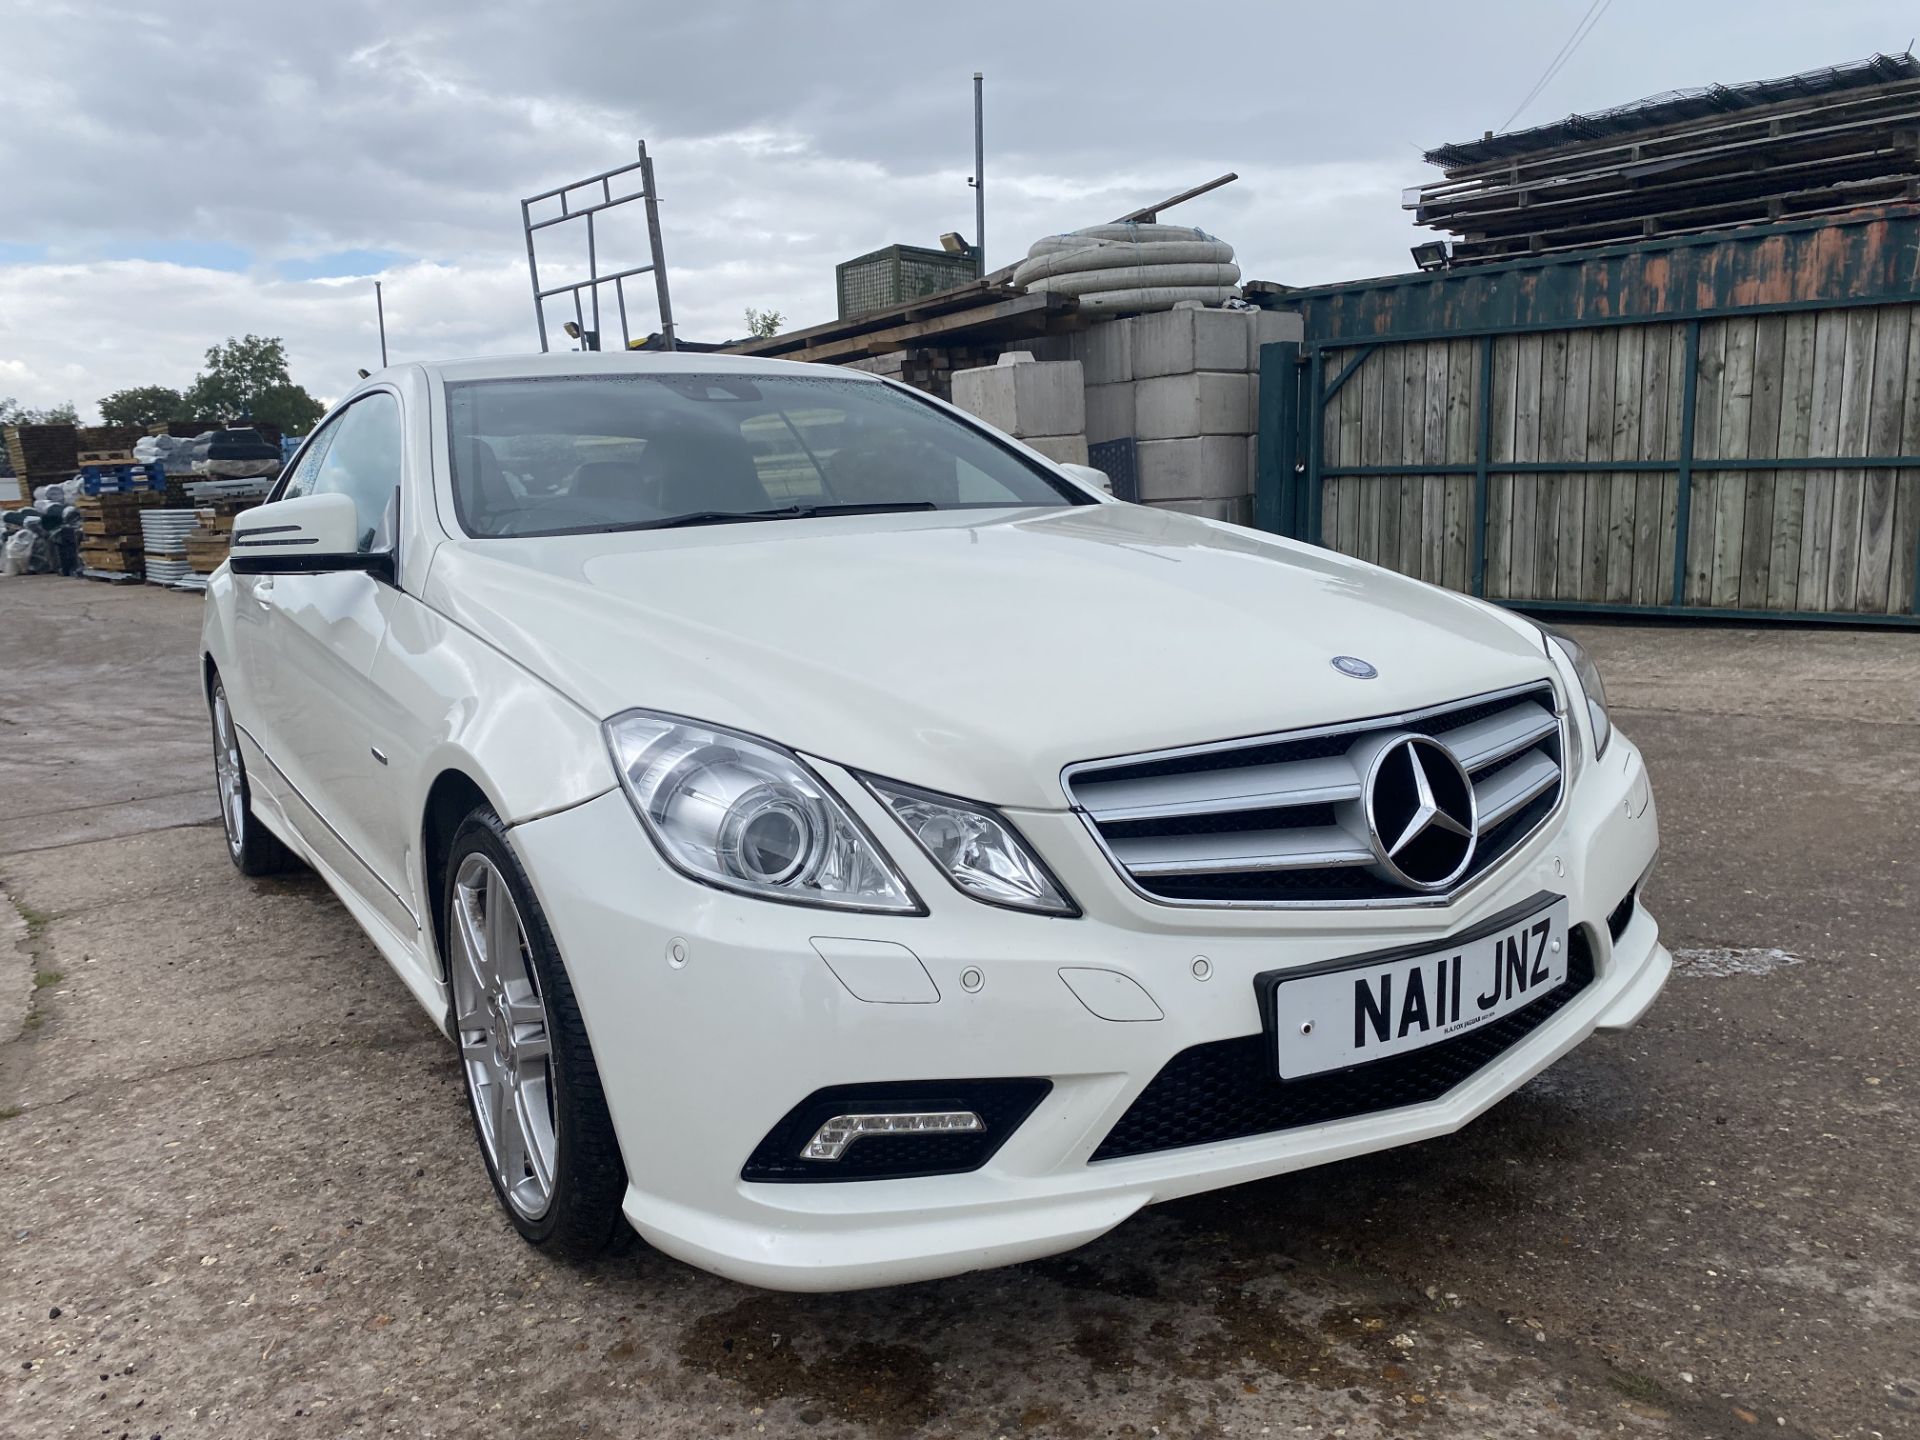 (ON SALE) MERCEDES E350 7G AUTO "BLUEEFFICIENCY "AMG" SPORT" COUPE (11 REG) SAT NAV *228BHP* LEATHER - Image 3 of 23